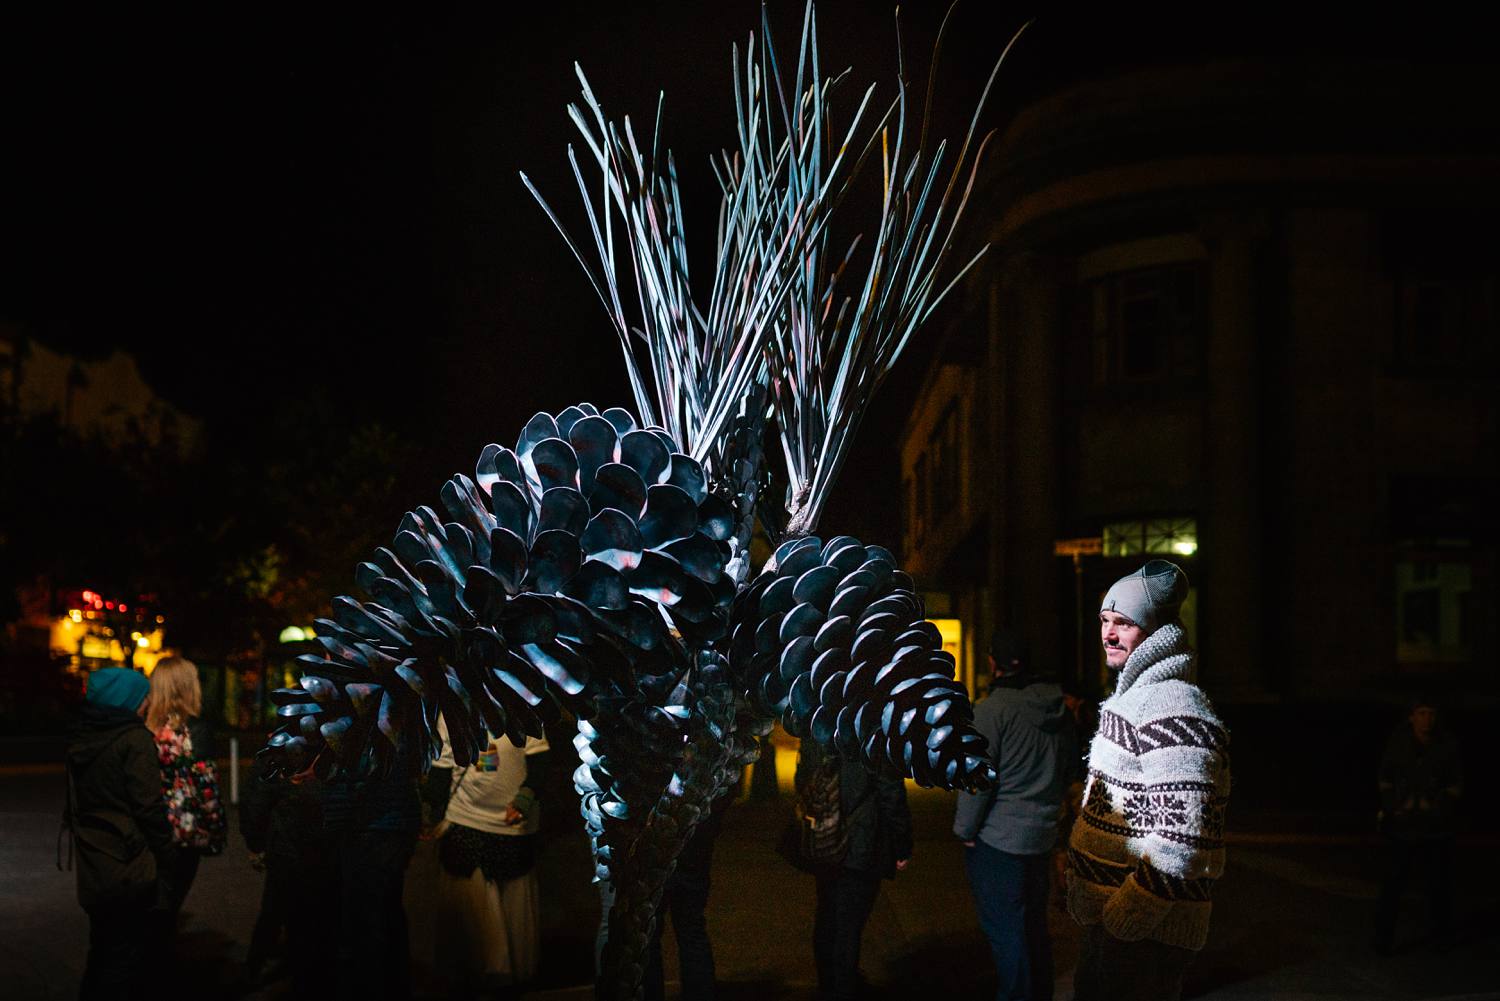 large-metal-large-pinecone-scultpure-downtown-revelstoke-at-night-during-luna-art-festival